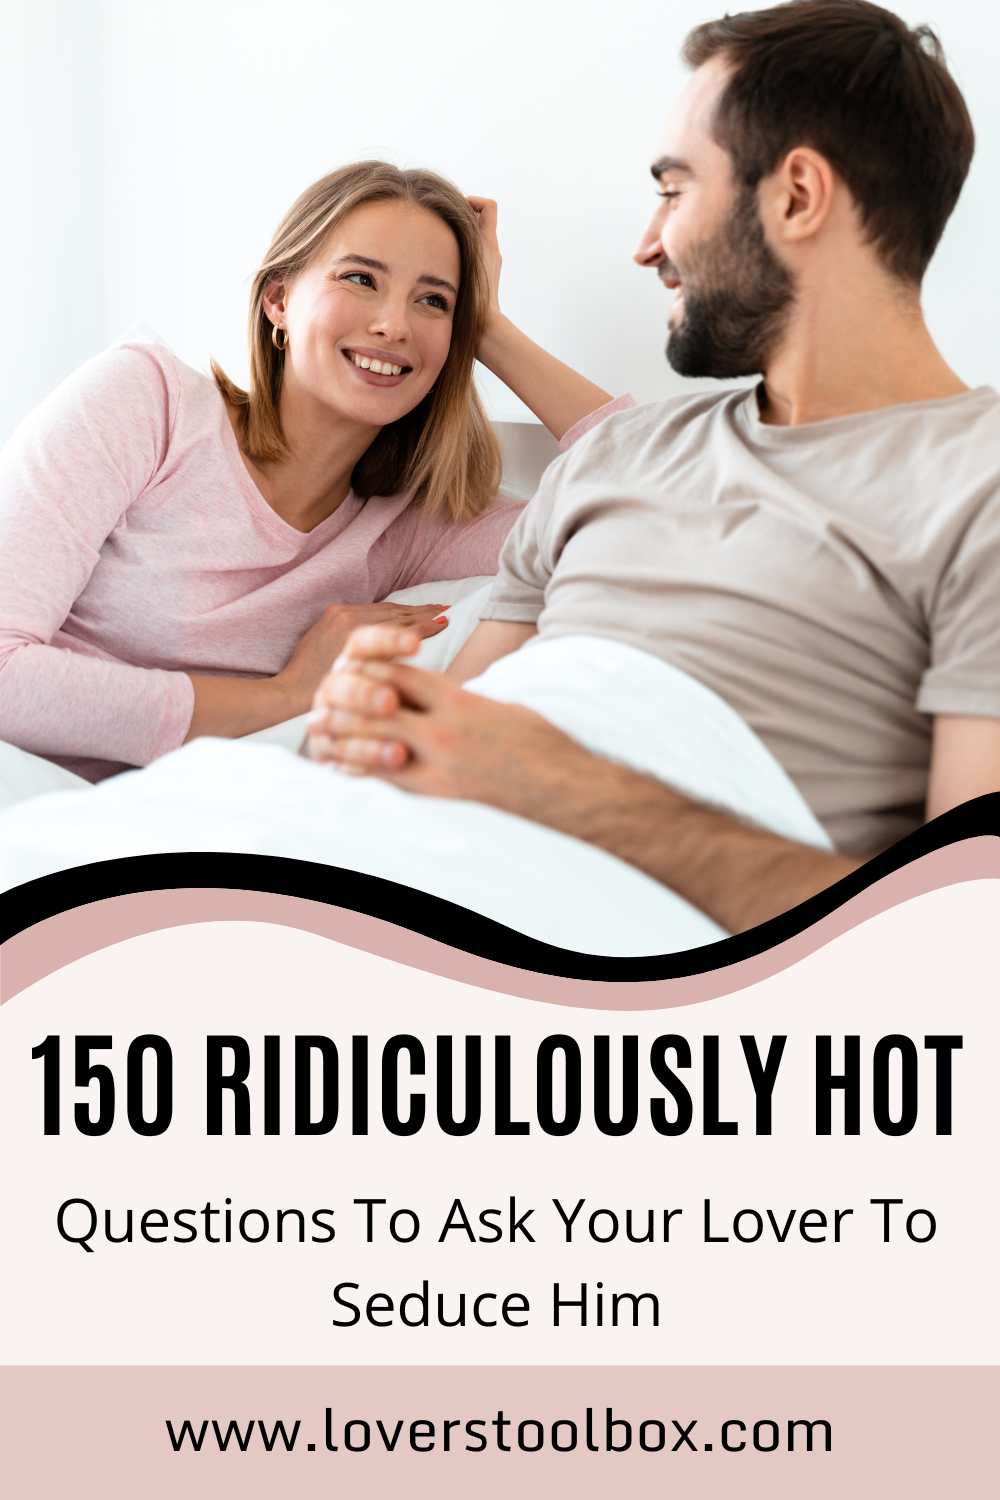 150 Ridiculously Hot Questions To Ask Your Lover